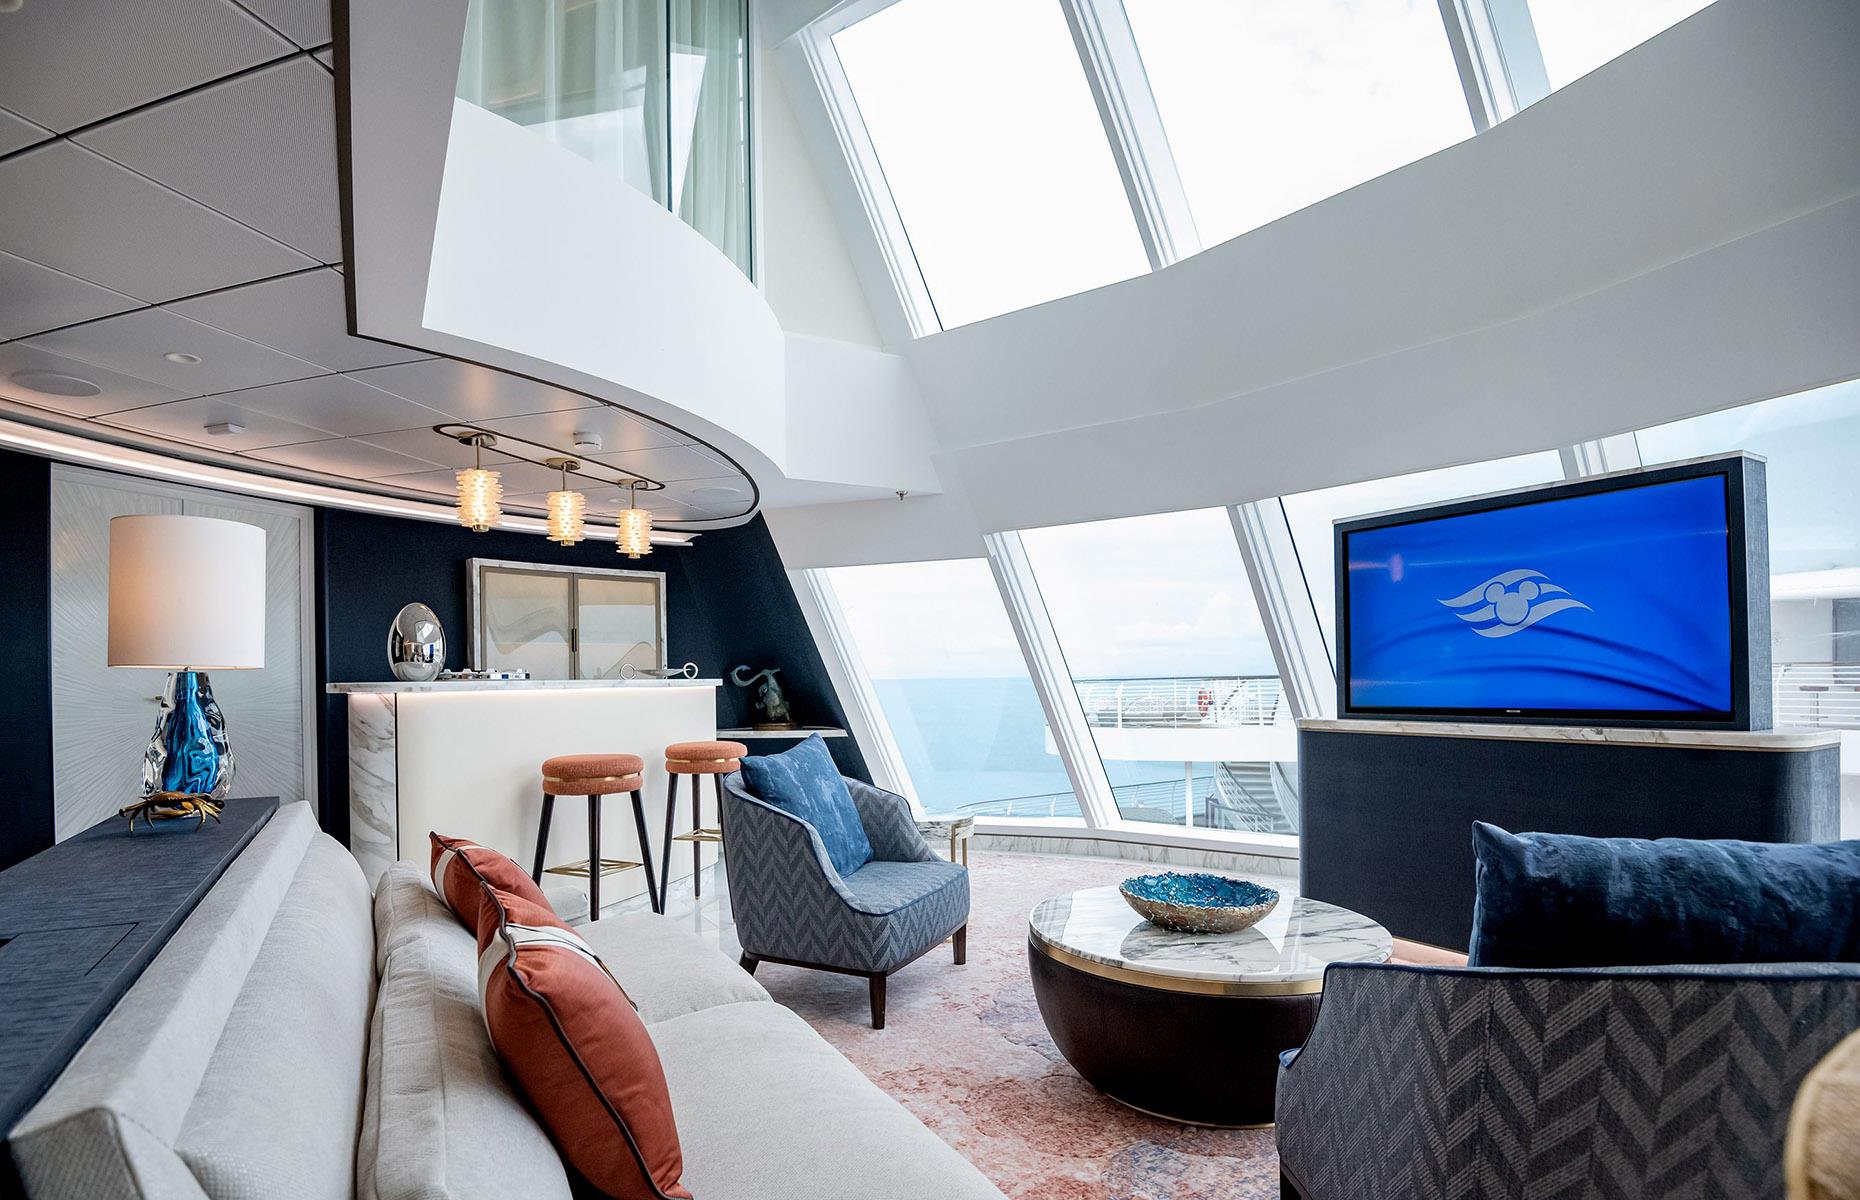 <p>Perched in the funnel of the ship, high above the upper decks, the Tower Suite is accessed by its own private elevator. Inside, the two-storey living room features a chandelier, floor-to-ceiling glass windows and decor subtly inspired by the Disney movie <em>Moana</em>. A grand spiral staircase connects the palatial living area, which includes a dining salon and wet bar, to the suite's four bedrooms. Added perks include a concierge who handles your priority reservations, and access to a VIP lounge and sun deck.</p>